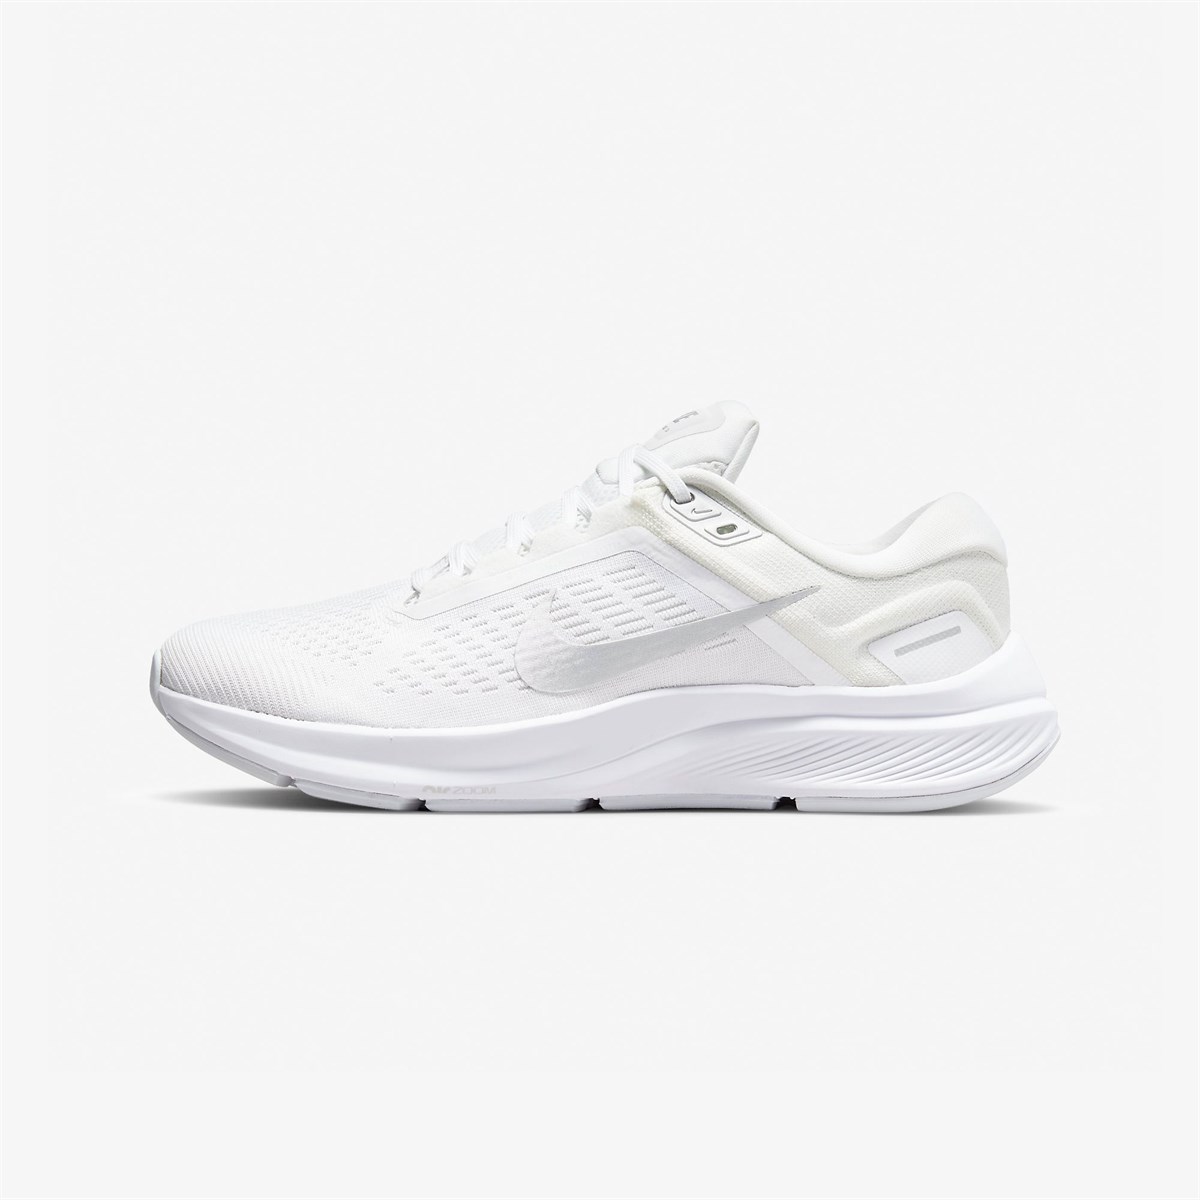 White Nike Womens Flyknit Interact Running Shoe Athletic, 50% OFF